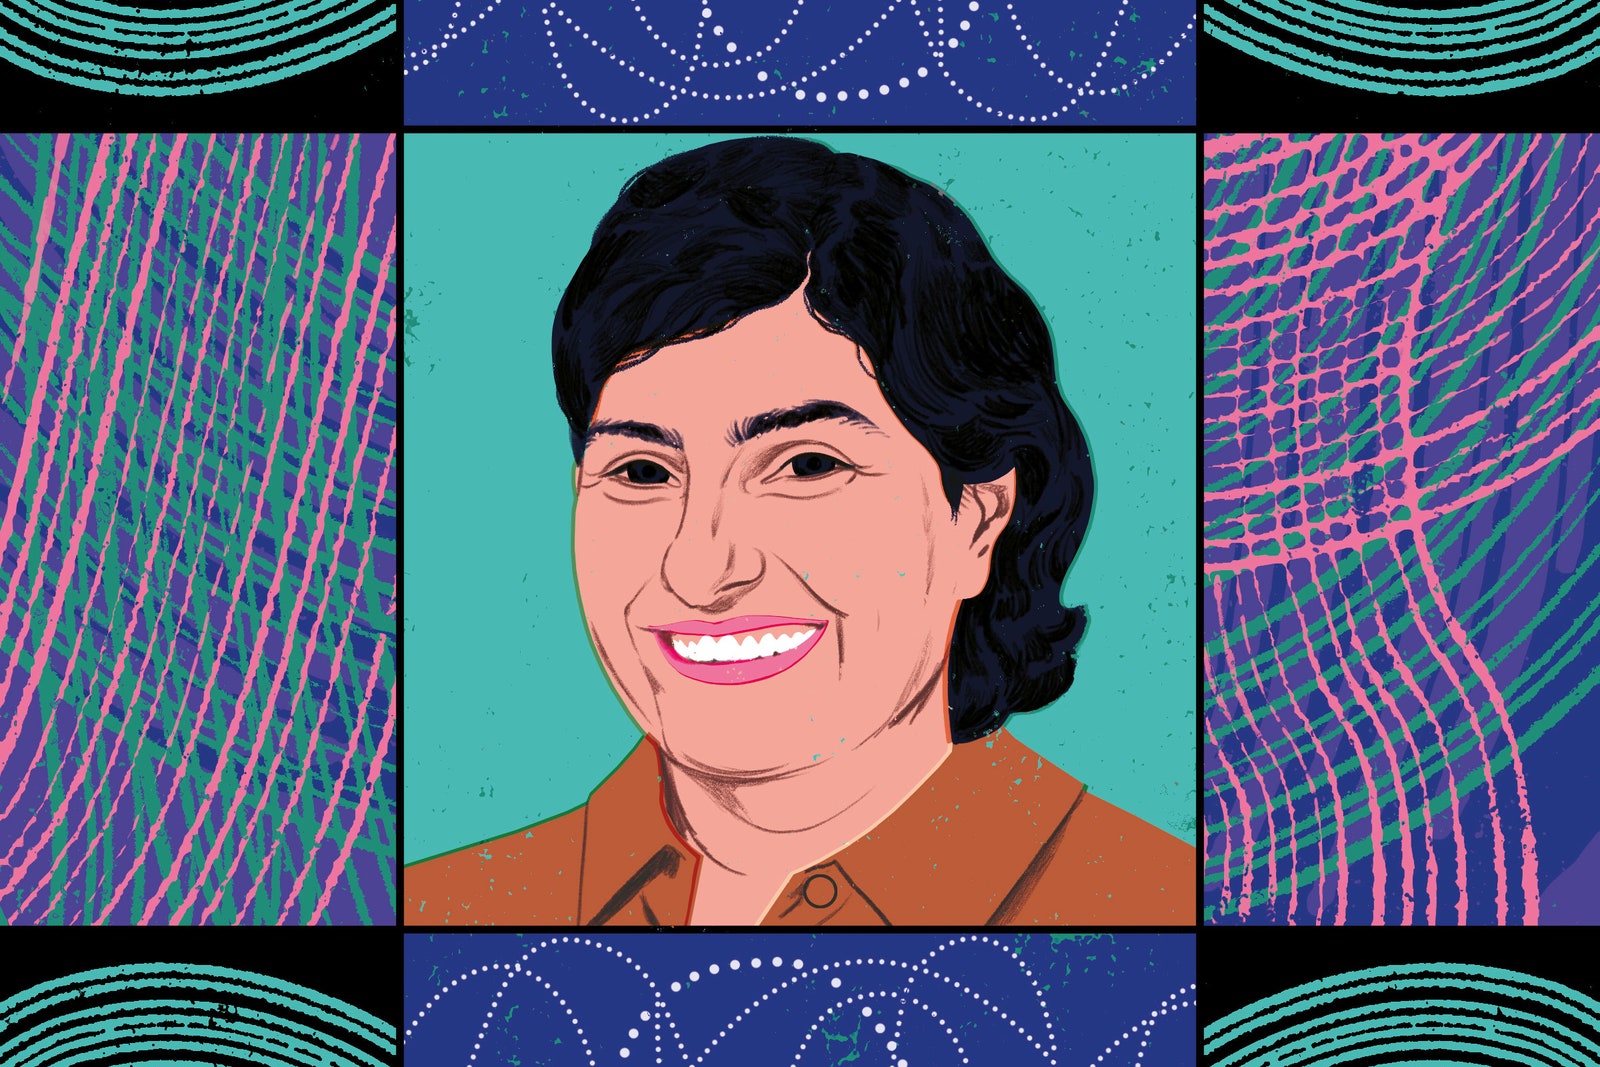 Dr. Nergis Mavalvala Helped Detect the First Gravitational Wave. Her Work Doesn’t Stop There